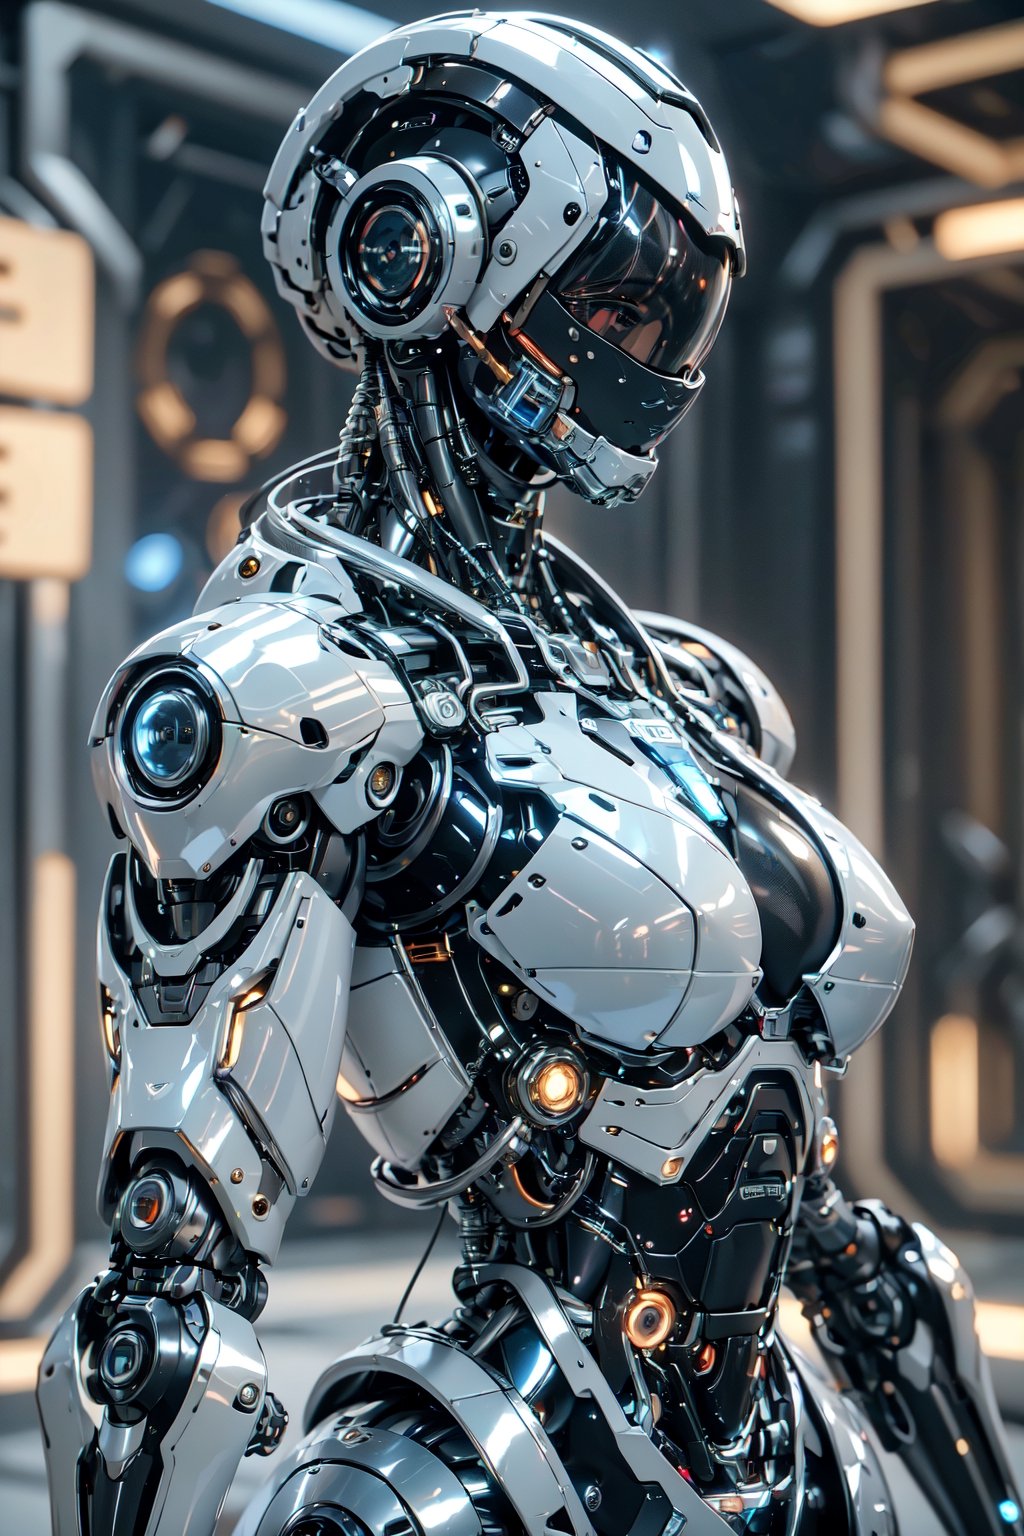 ((high resolution)), ((8K)), ((incredibly absurdres)), break. (super detailed metallic skin), (an extremely delicate and beautiful:1.3), break, ((1robot:1.5)), ((slender body)), (medium breasts), (beautiful hand), ((metallic body:1.3)), ((cyber helmet with full-face mask:1.4)), break. ((no hair:1.3)) , (blue glowing lines on one's body:1.2), break. ((intricate internal structure)), ((brighten parts:1.5)), break. ((robotic face:1.2)), (robotic arms), (robotic legs), huge breasts(robotic hands), ((robotic joint:1.2)), (Cinematic angle), (ultra-fine quality), (masterpiece), (best quality), (incredibly absurdres), (highly detailed), high res, high detail eyes, high detail background, sharp focus, (photon mapping, radiosity, physically-based rendering, automatic white balance), masterpiece, best quality, ((Mecha body)), furure_urban, incredibly absurdres, science fiction, Fire Angel Mecha,huge breasts